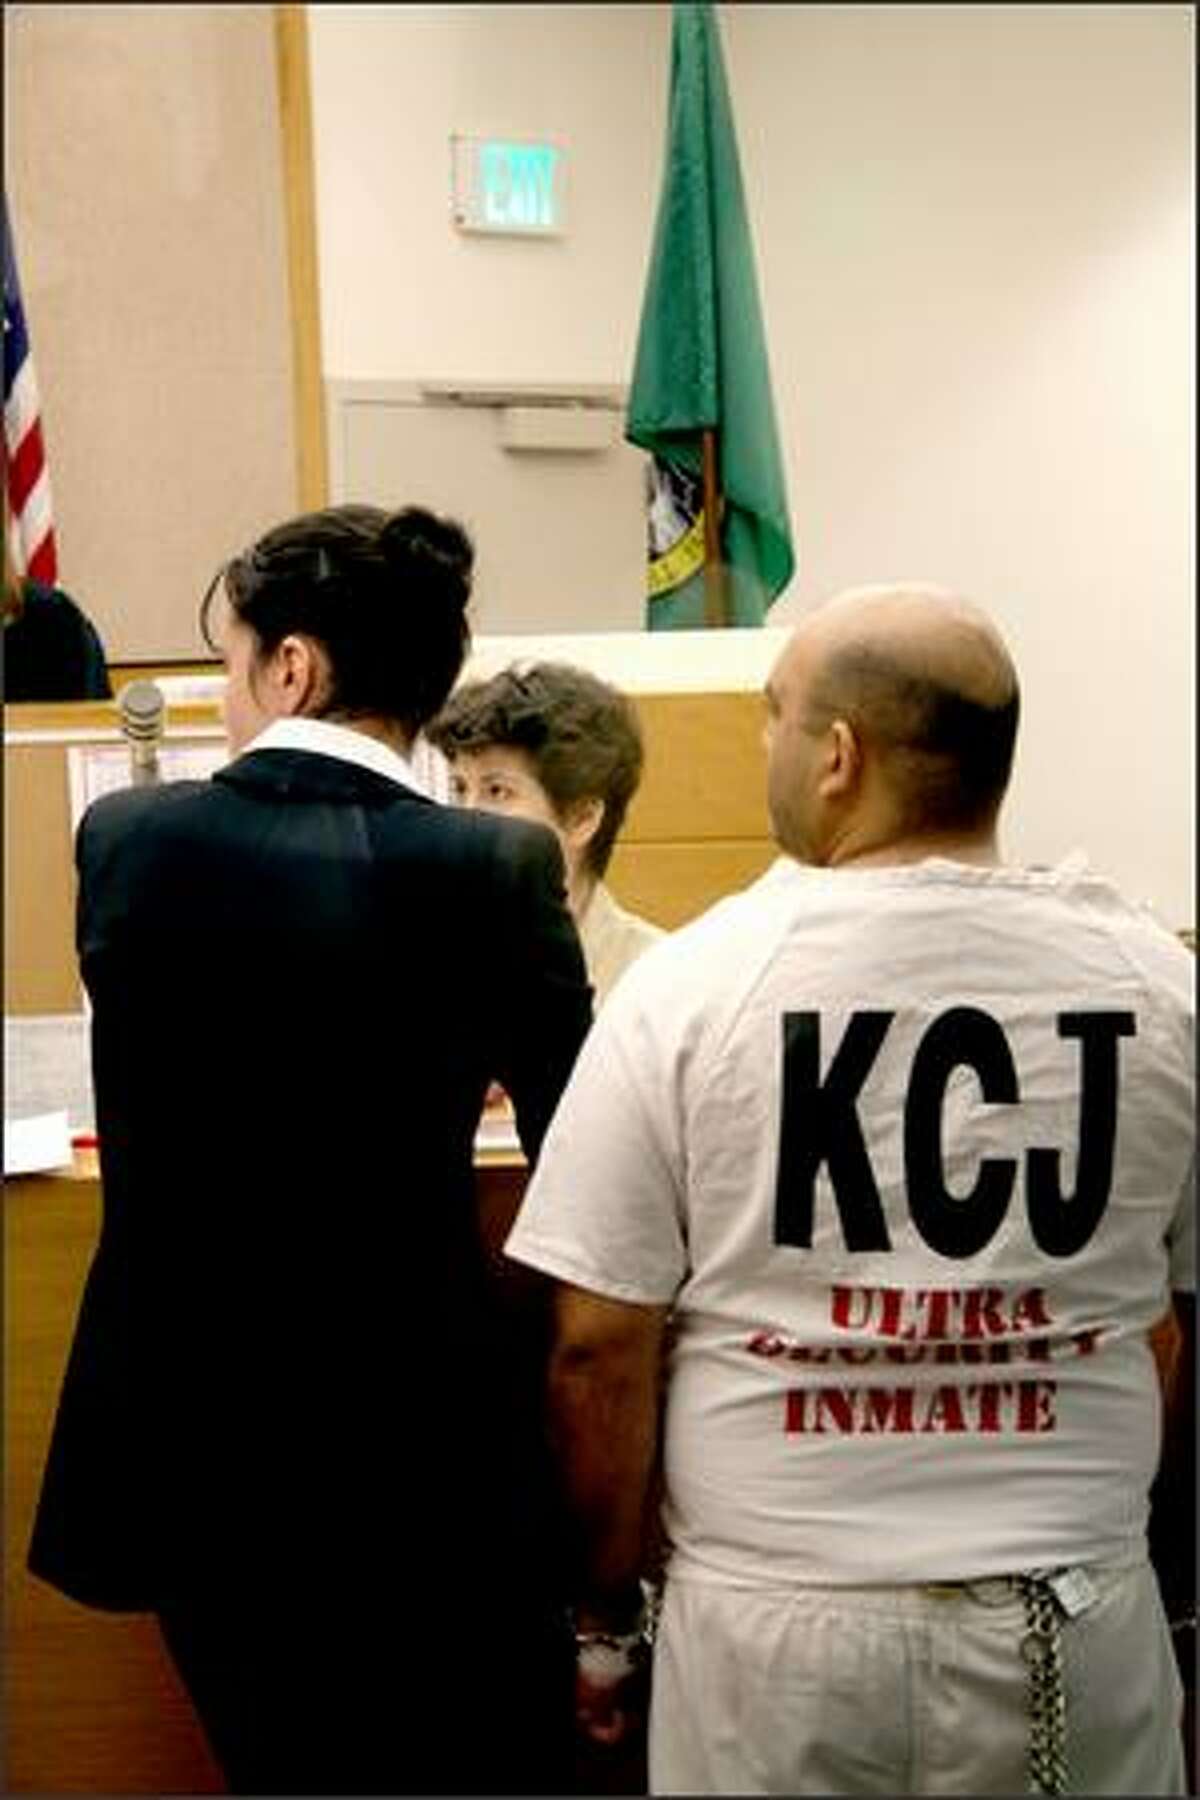 Naveed Afzal Haq, 30, is brought into the courtroom after being booked into the King County Jail.